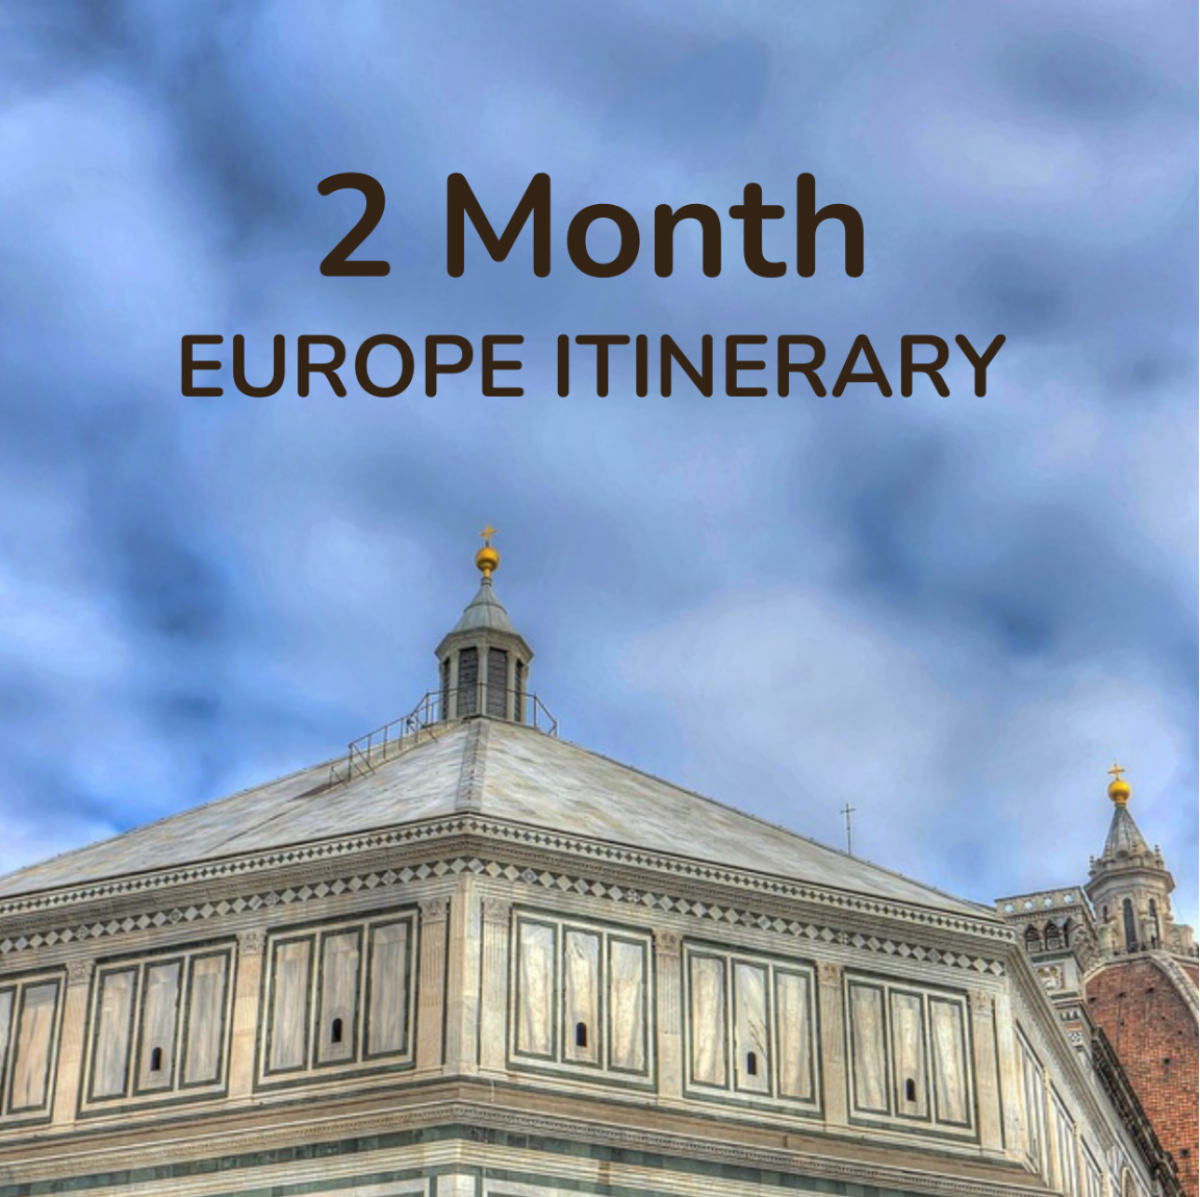 2 month trip to europe